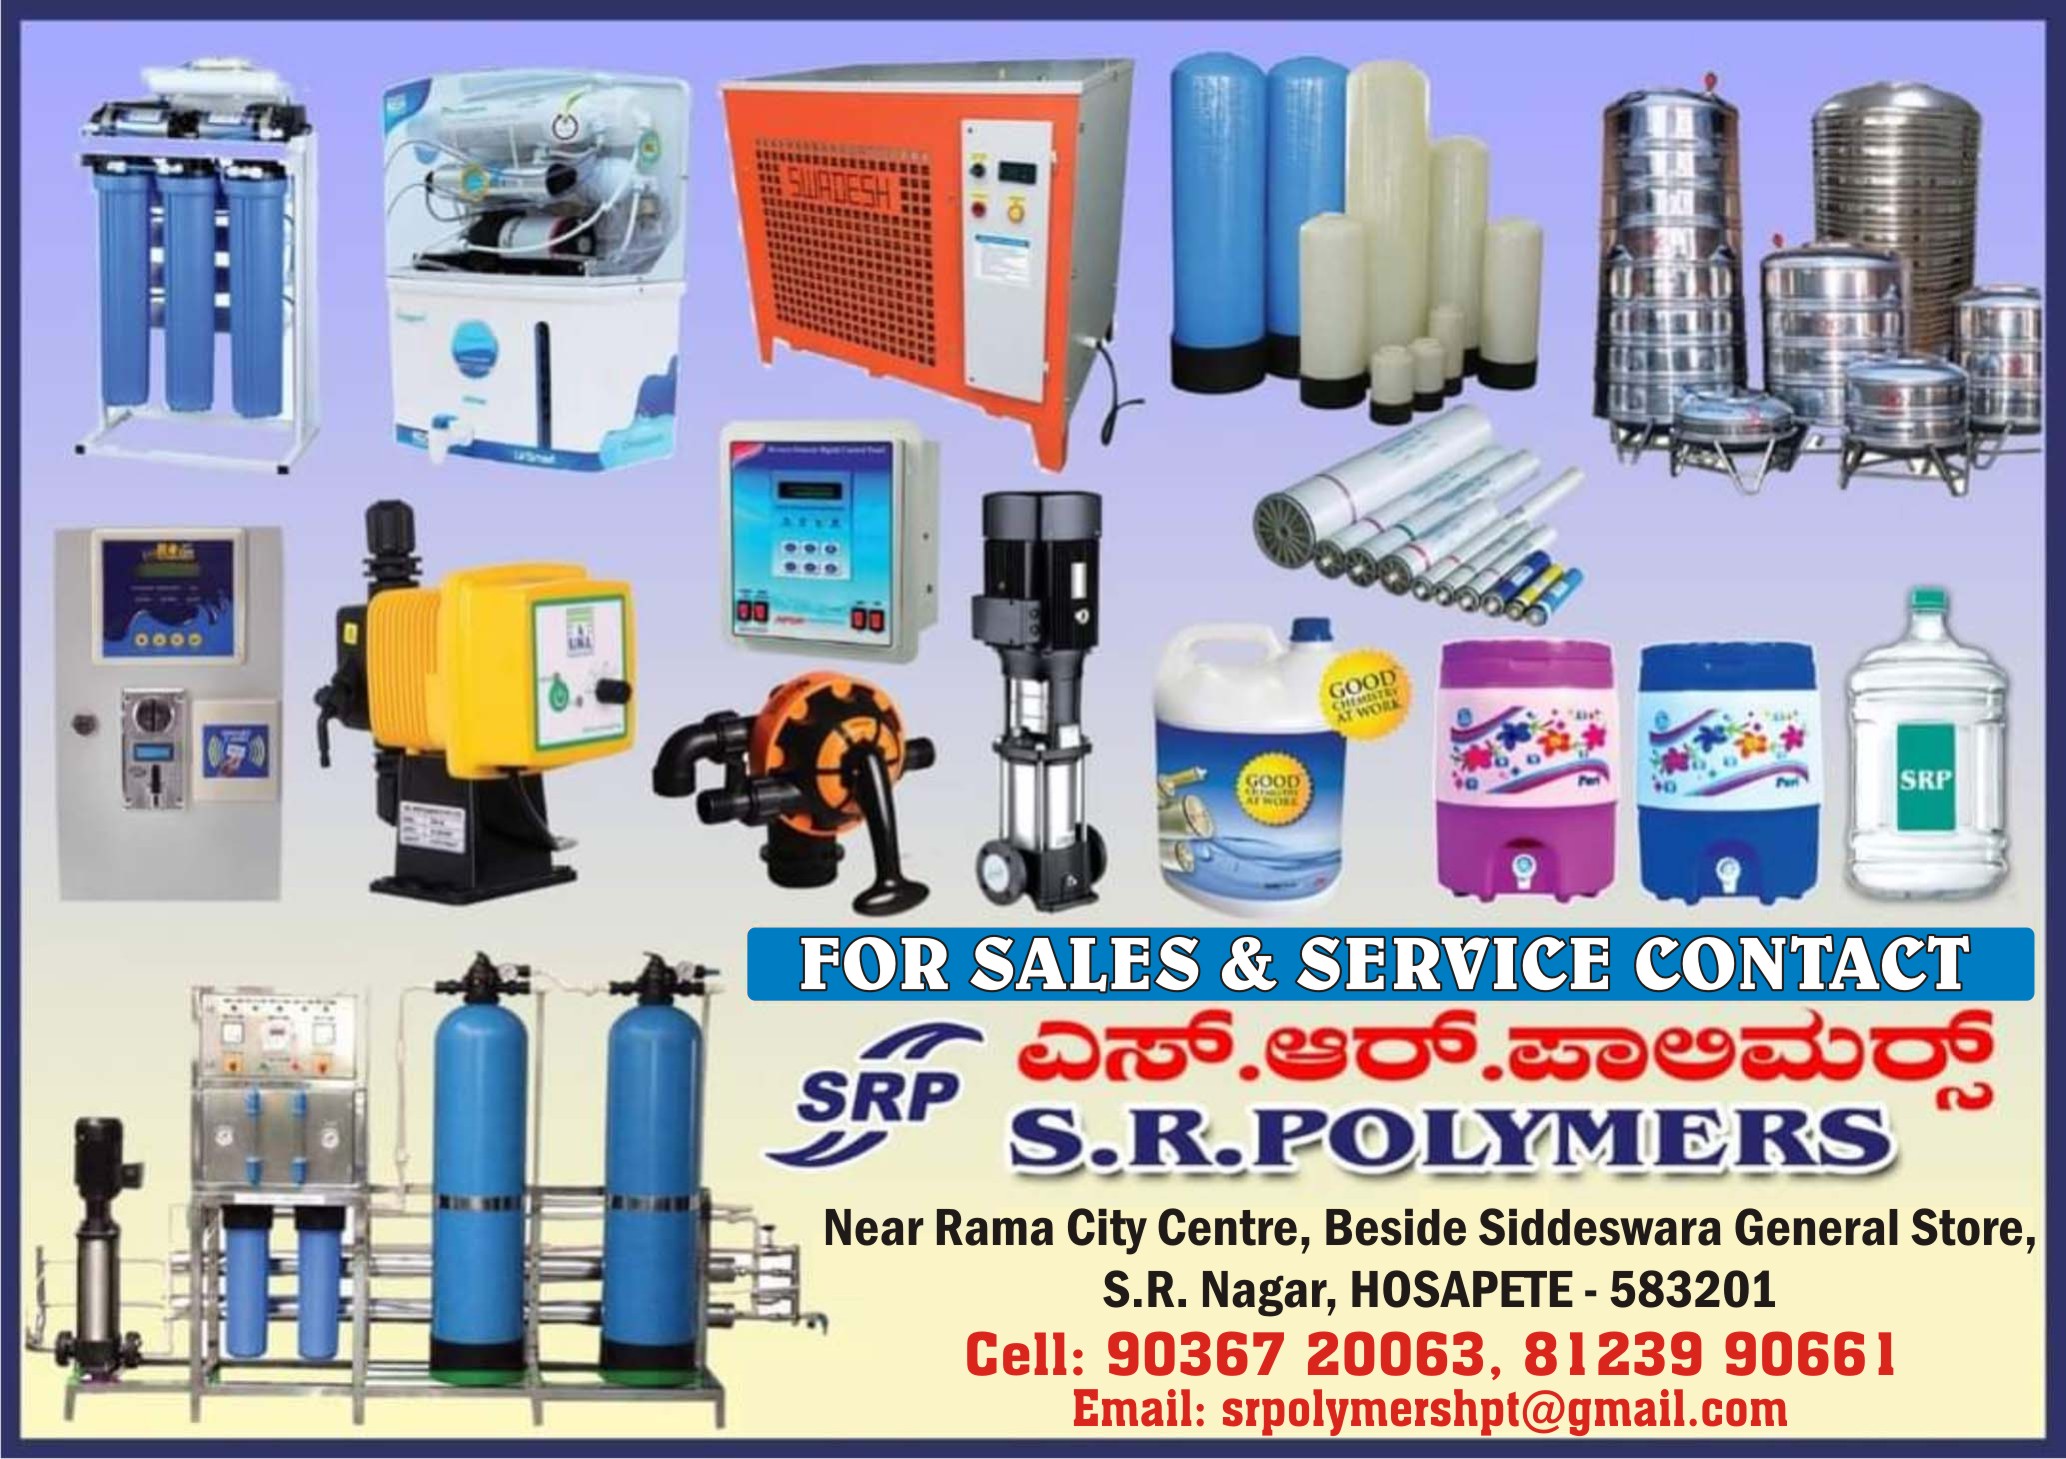 S.R. Polymers